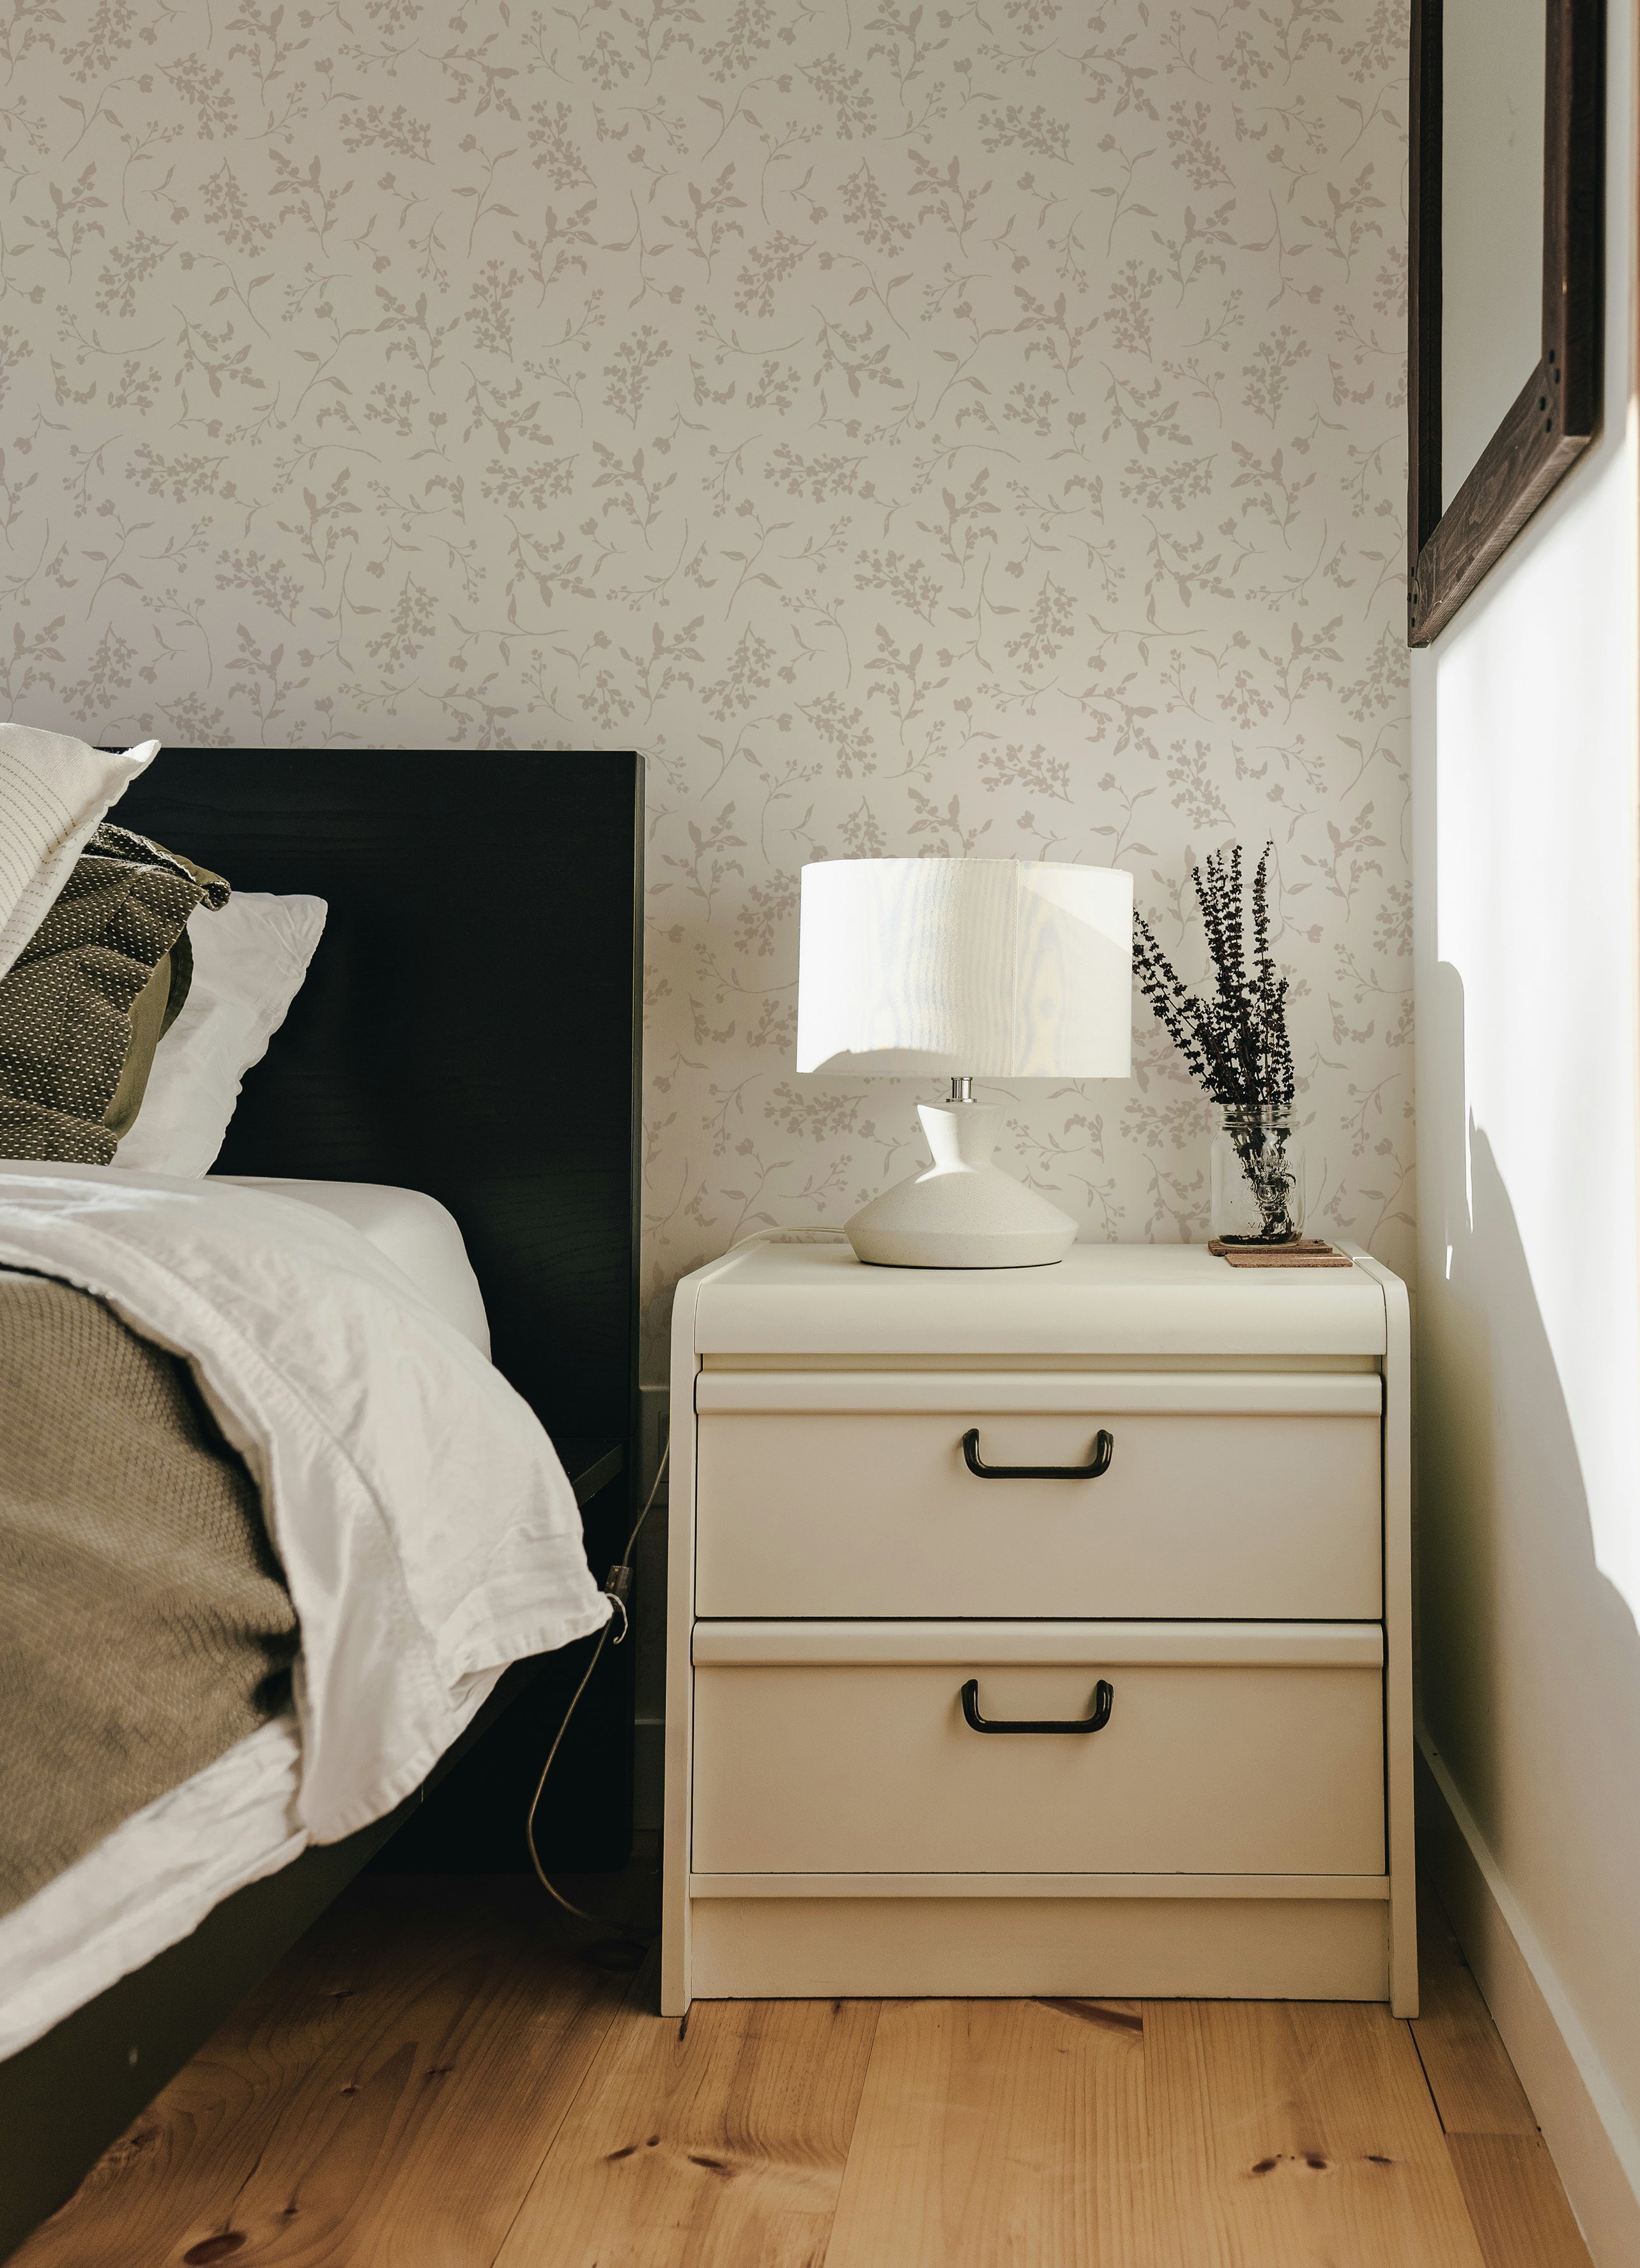 A bedroom corner elegantly dressed in Fiore D'epoca Wallpaper with subtle, beige floral patterns, enhancing the serene and classic style of the room, complete with a modern bedside lamp and minimalist decorations